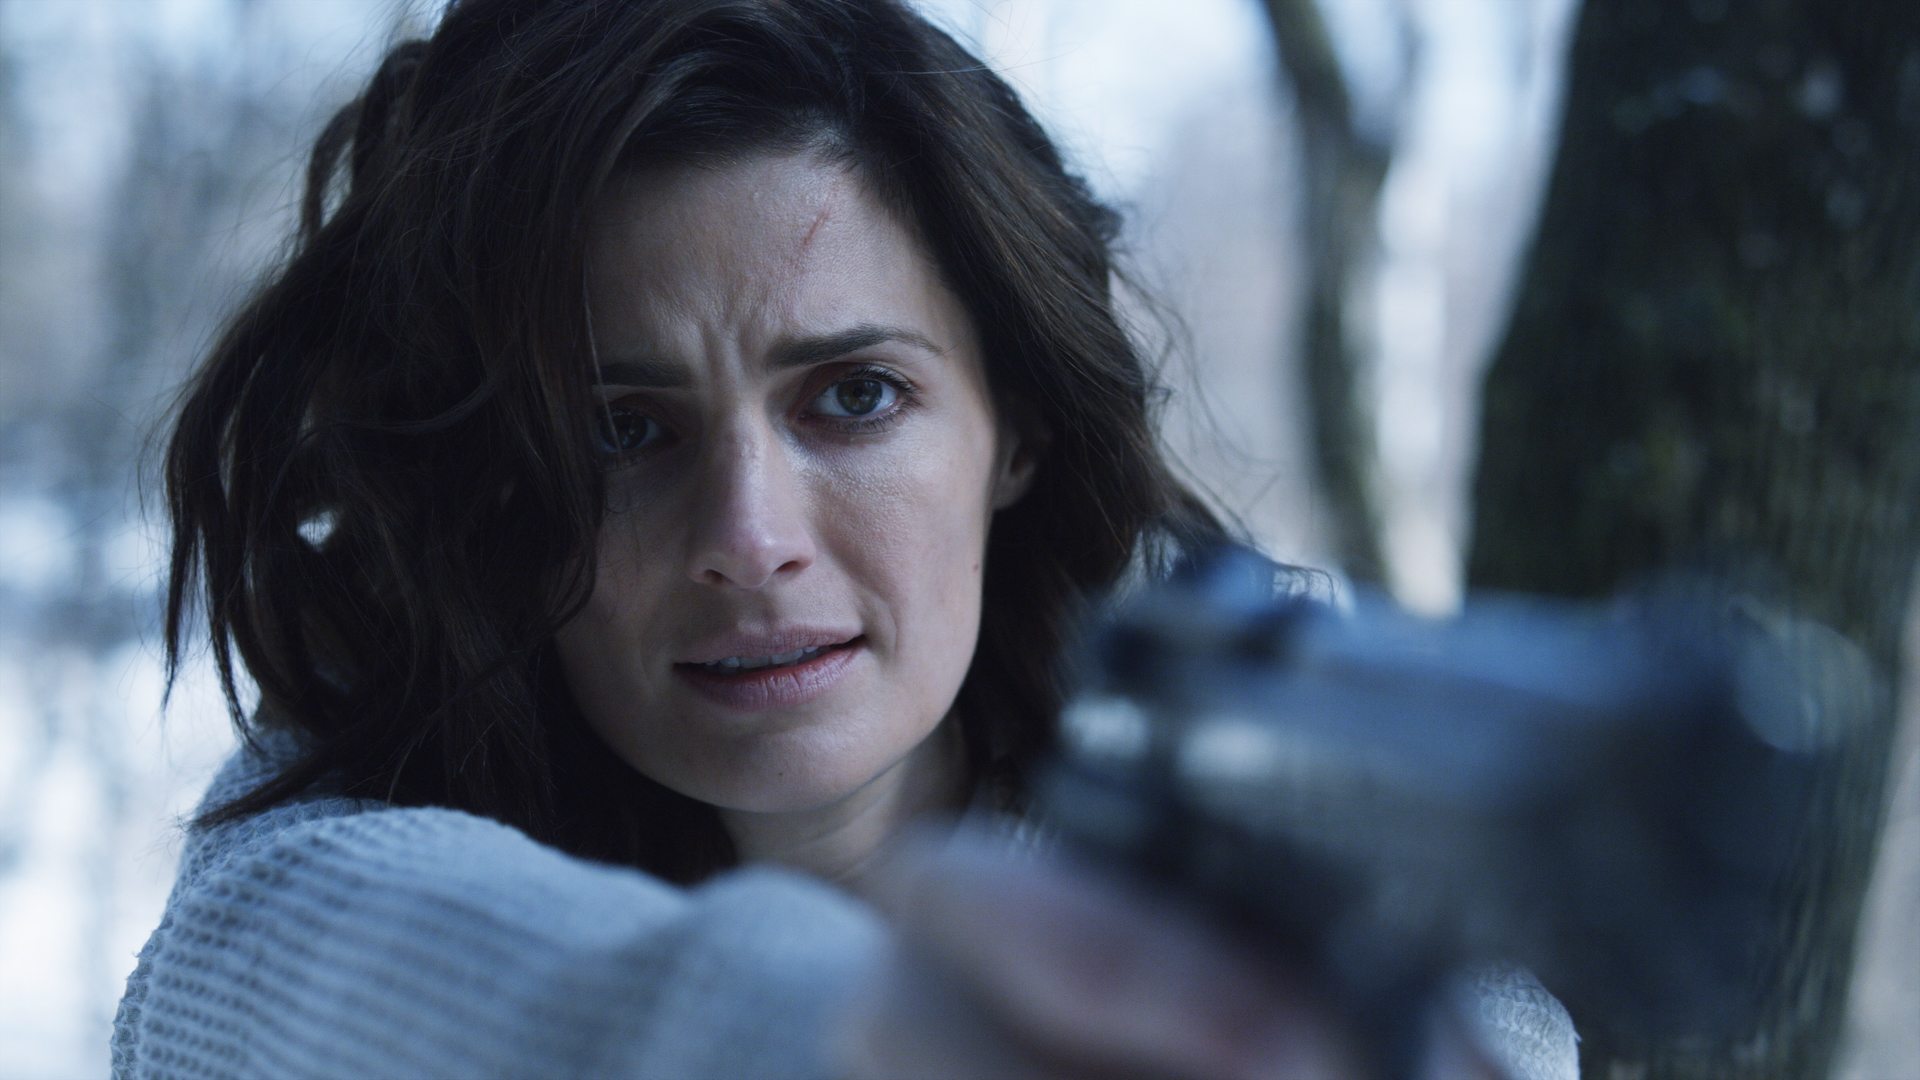 Absentia Season 2- Katic reveals spoilers, saying things will change in second installment